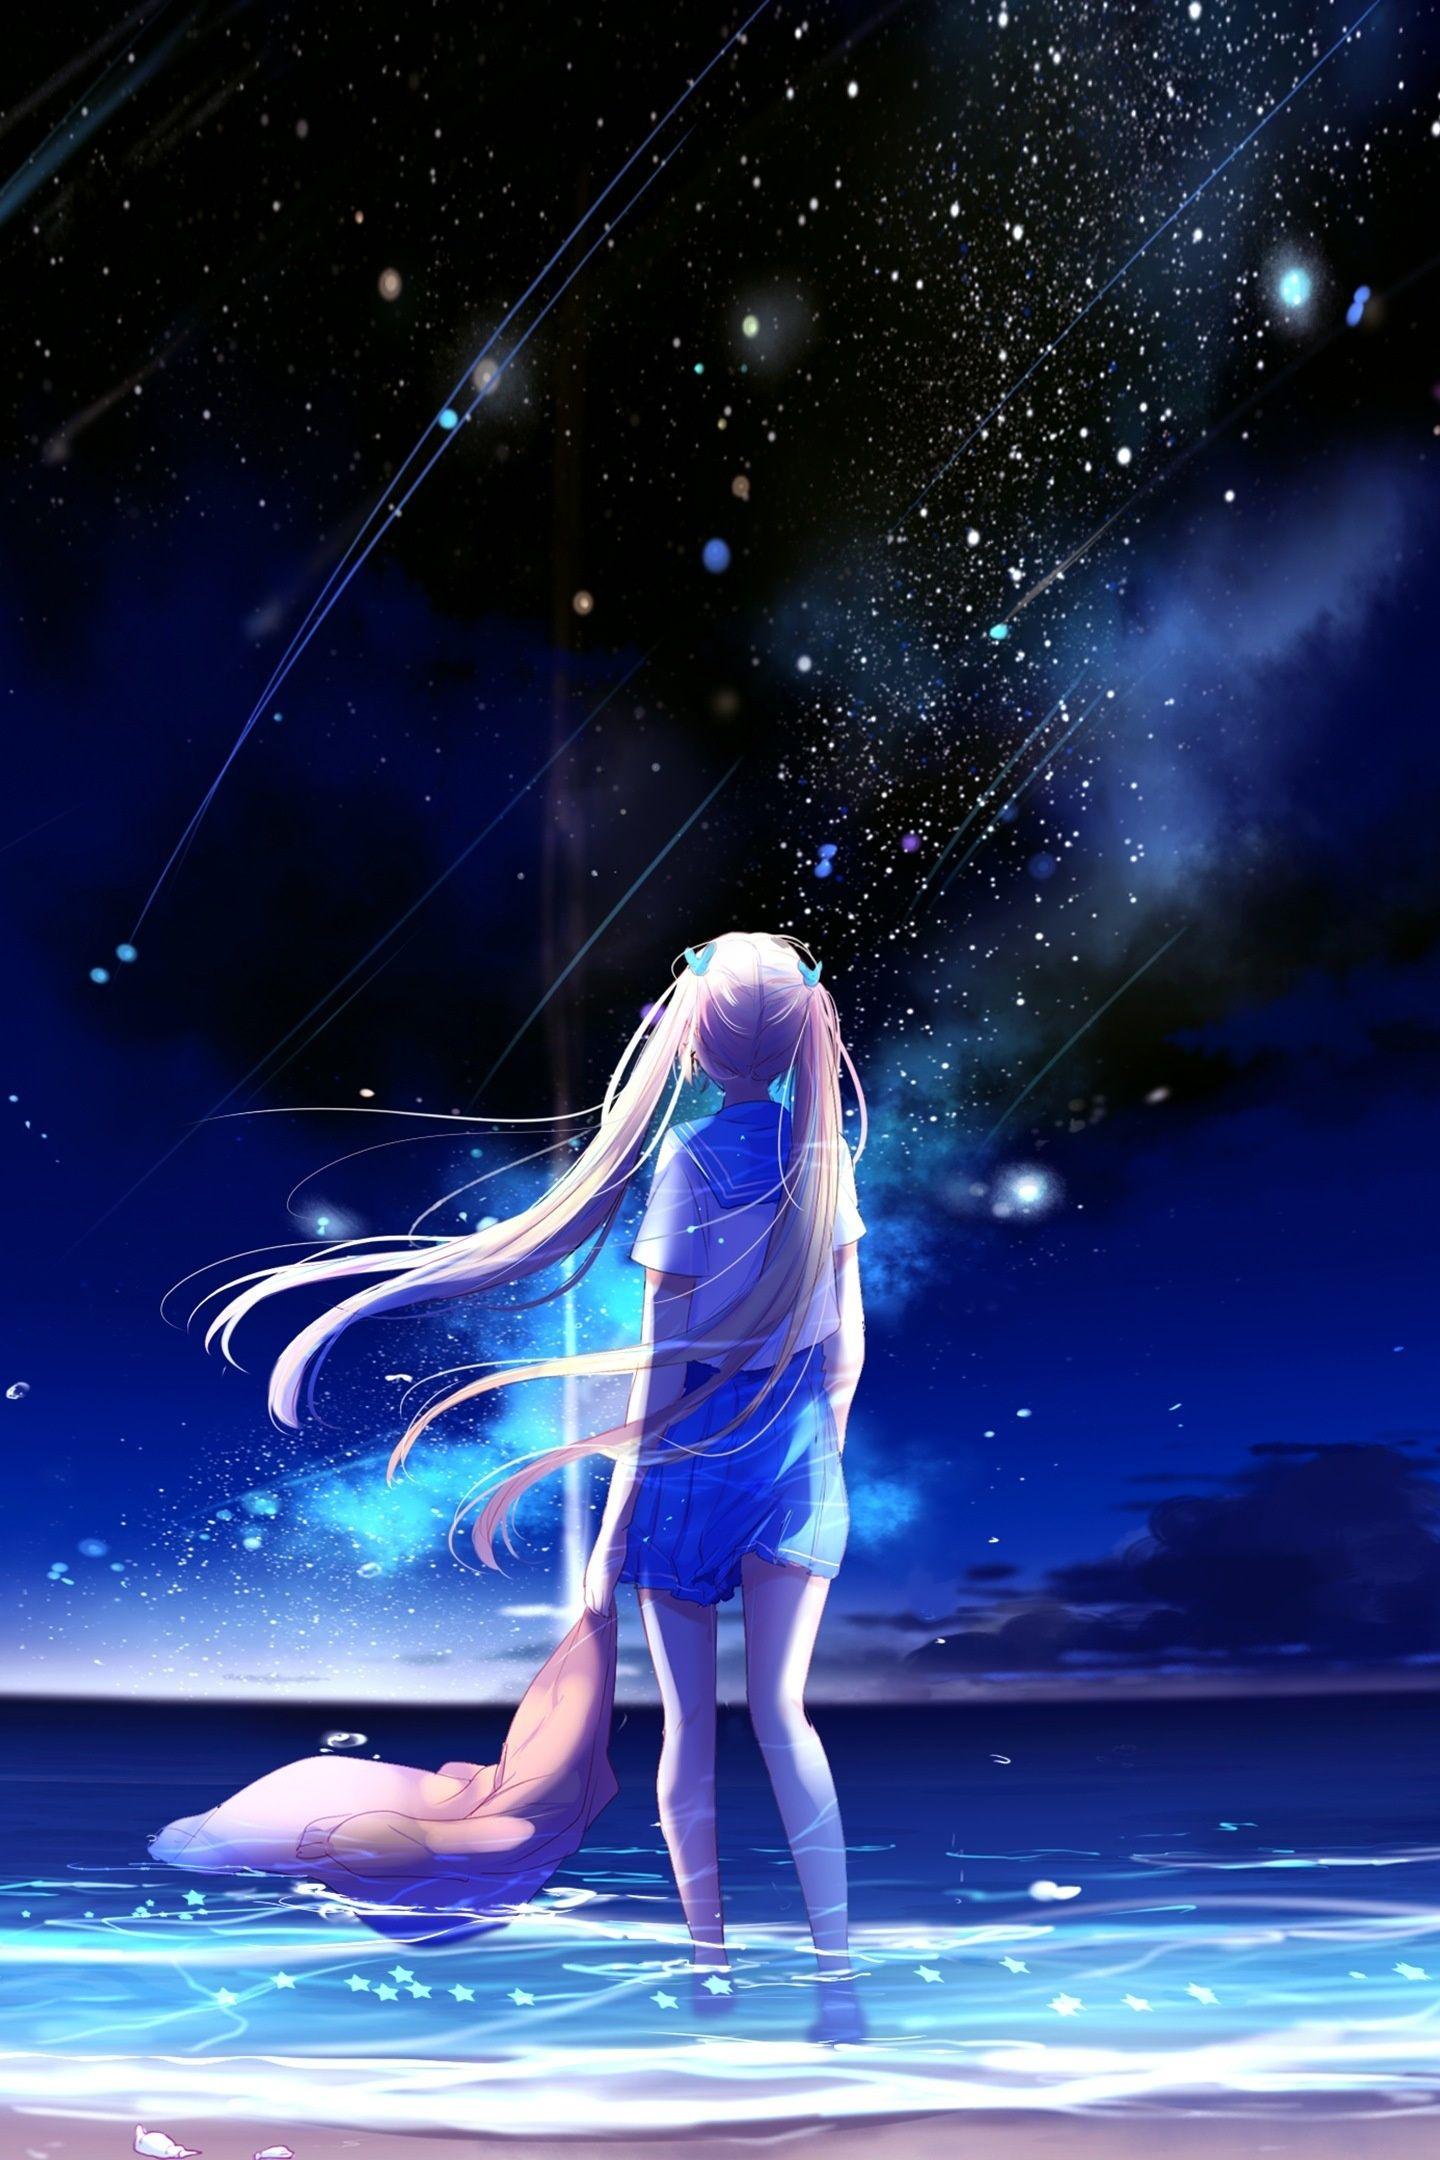 Anime Galaxy Wallpapers Top Free Anime Galaxy Backgrounds Wallpaperaccess